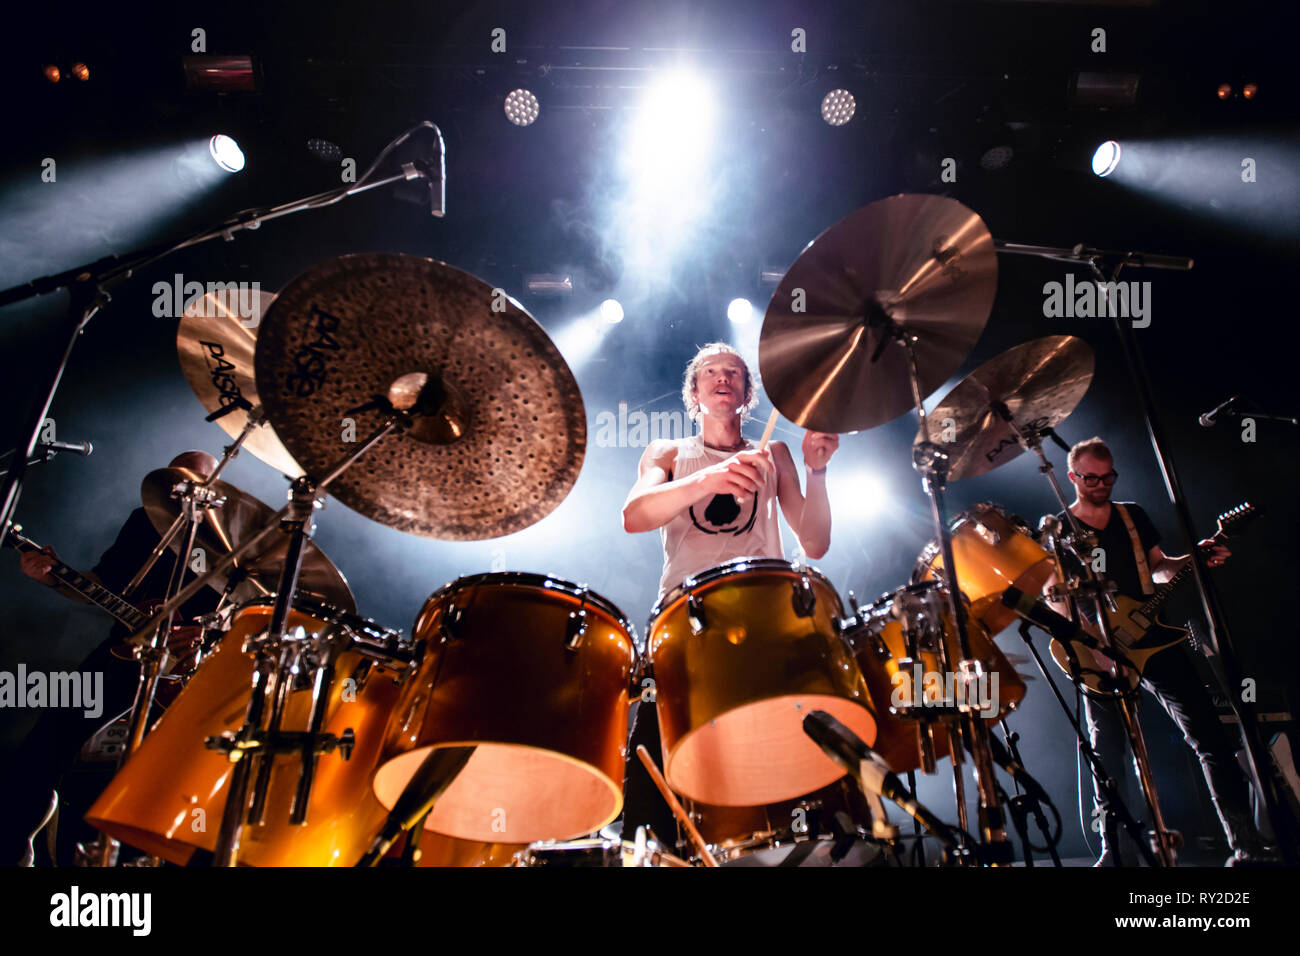 Norway, Bergen - March 2, 2019. The Norwegian blues rock band Spidergawd performs a live concert at USF Veftet in Bergen. Here drummer Kenneth Kapstad is seen live on stage. (Photo credit: Gonzales Photo - Jarle H. Moe). Stock Photo